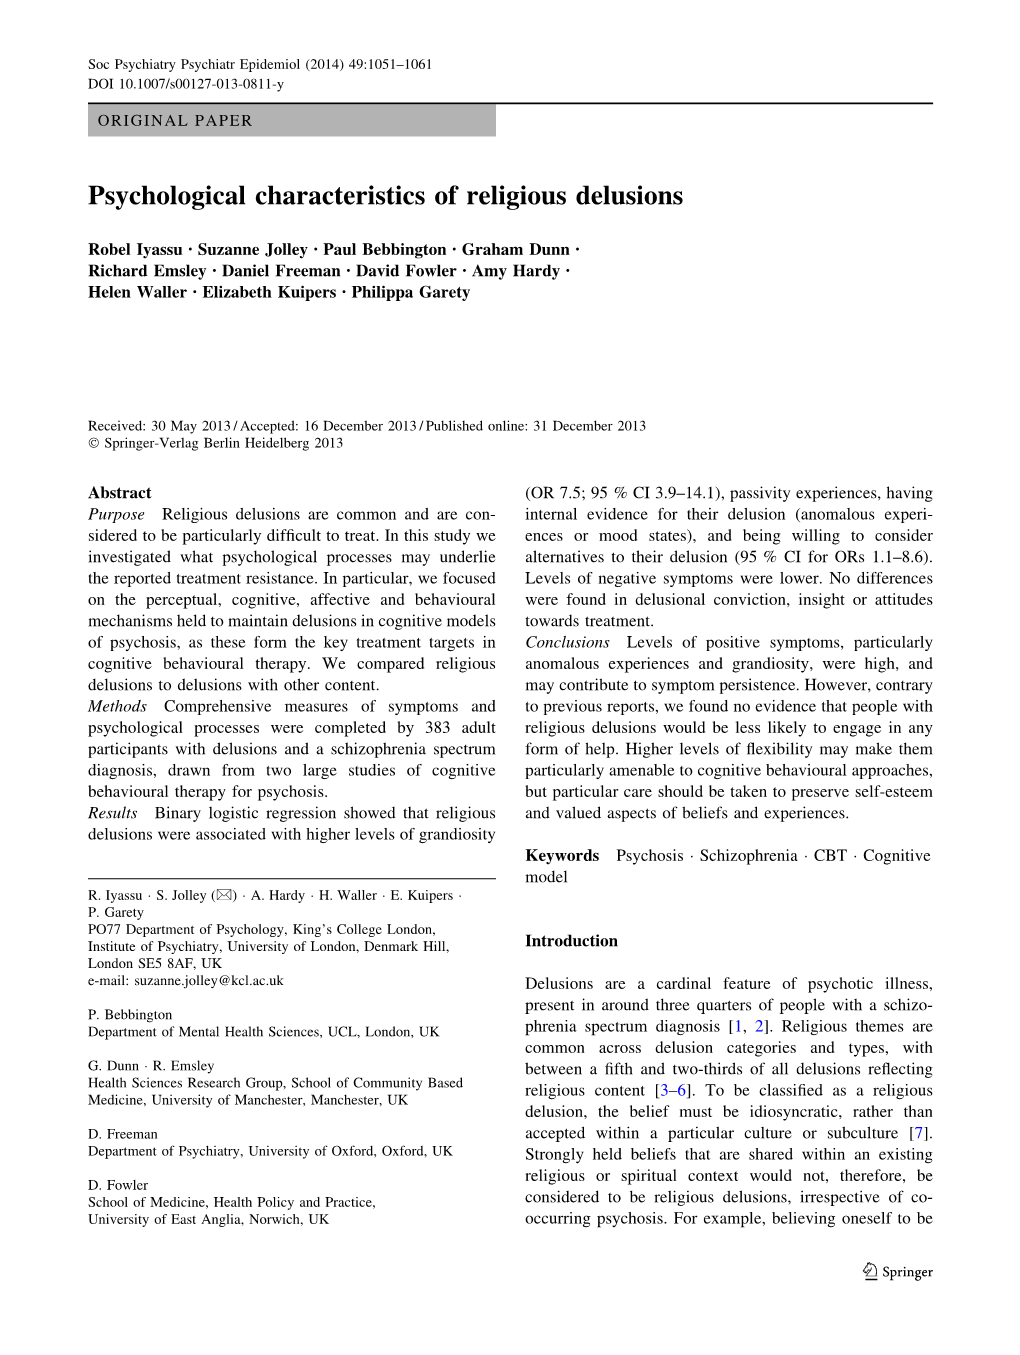 Psychological Characteristics of Religious Delusions